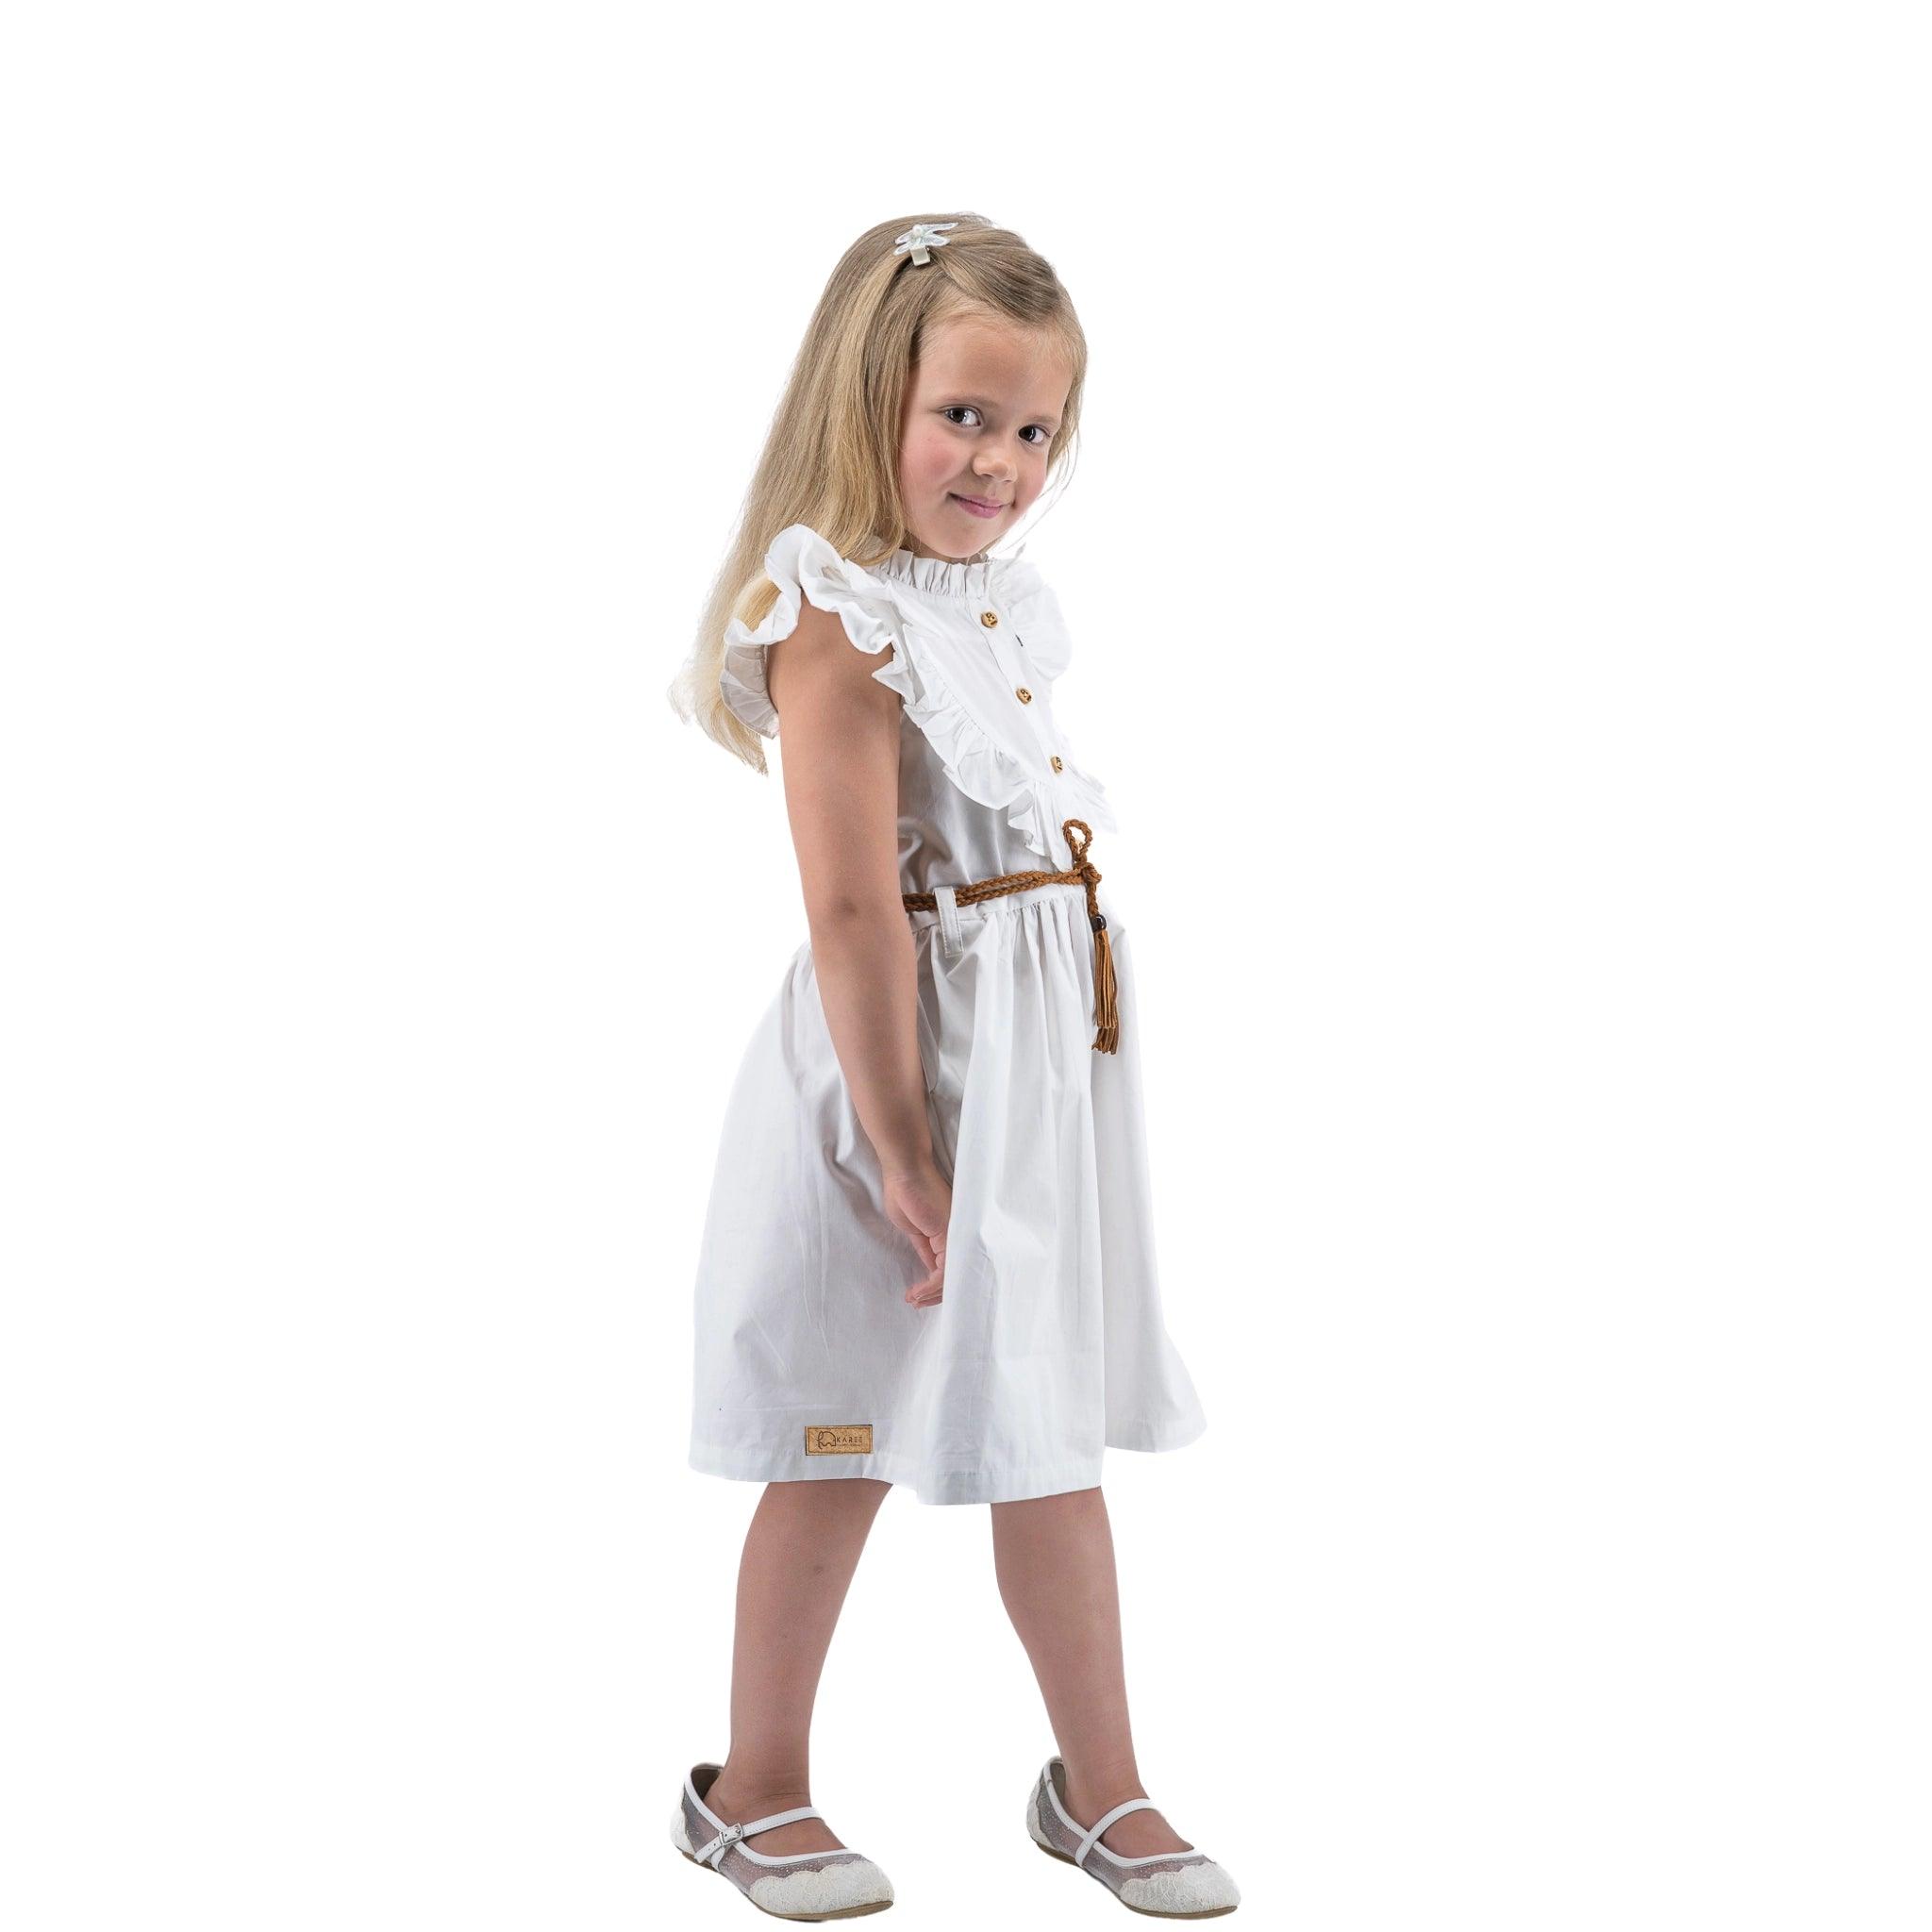 Young girl standing in a Karee Butterfly Sleeve Cotton Dress in White with a belt, looking over her shoulder with a slight smile, against a white background.